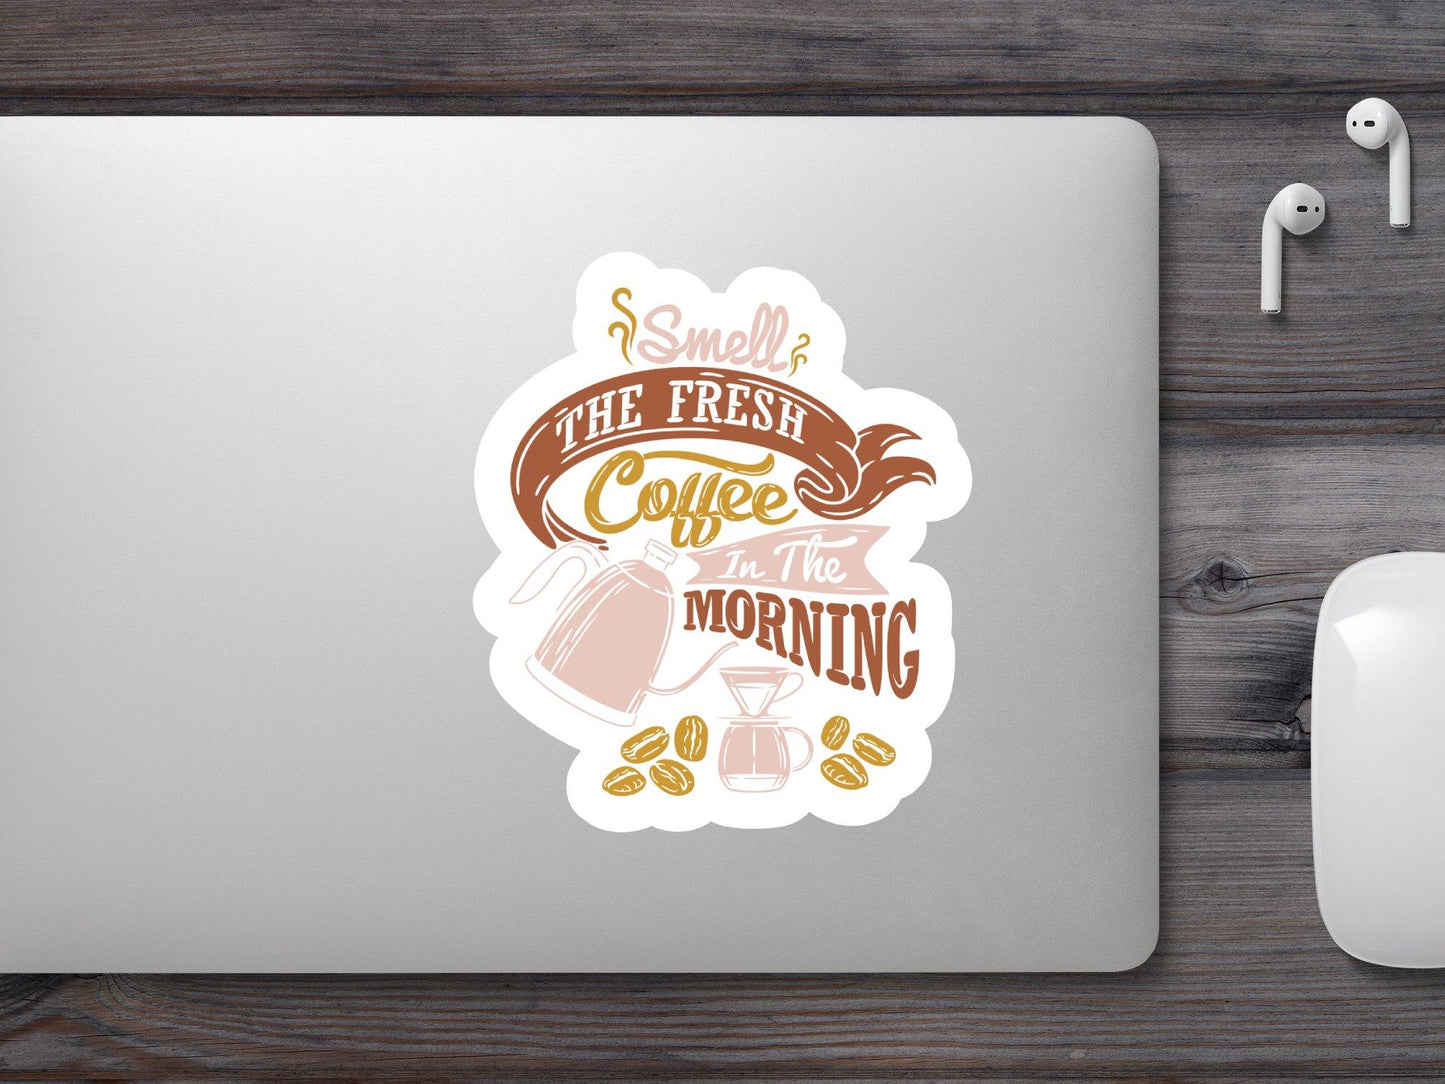 Smell The Fresh Coffee in The Morning Sticker